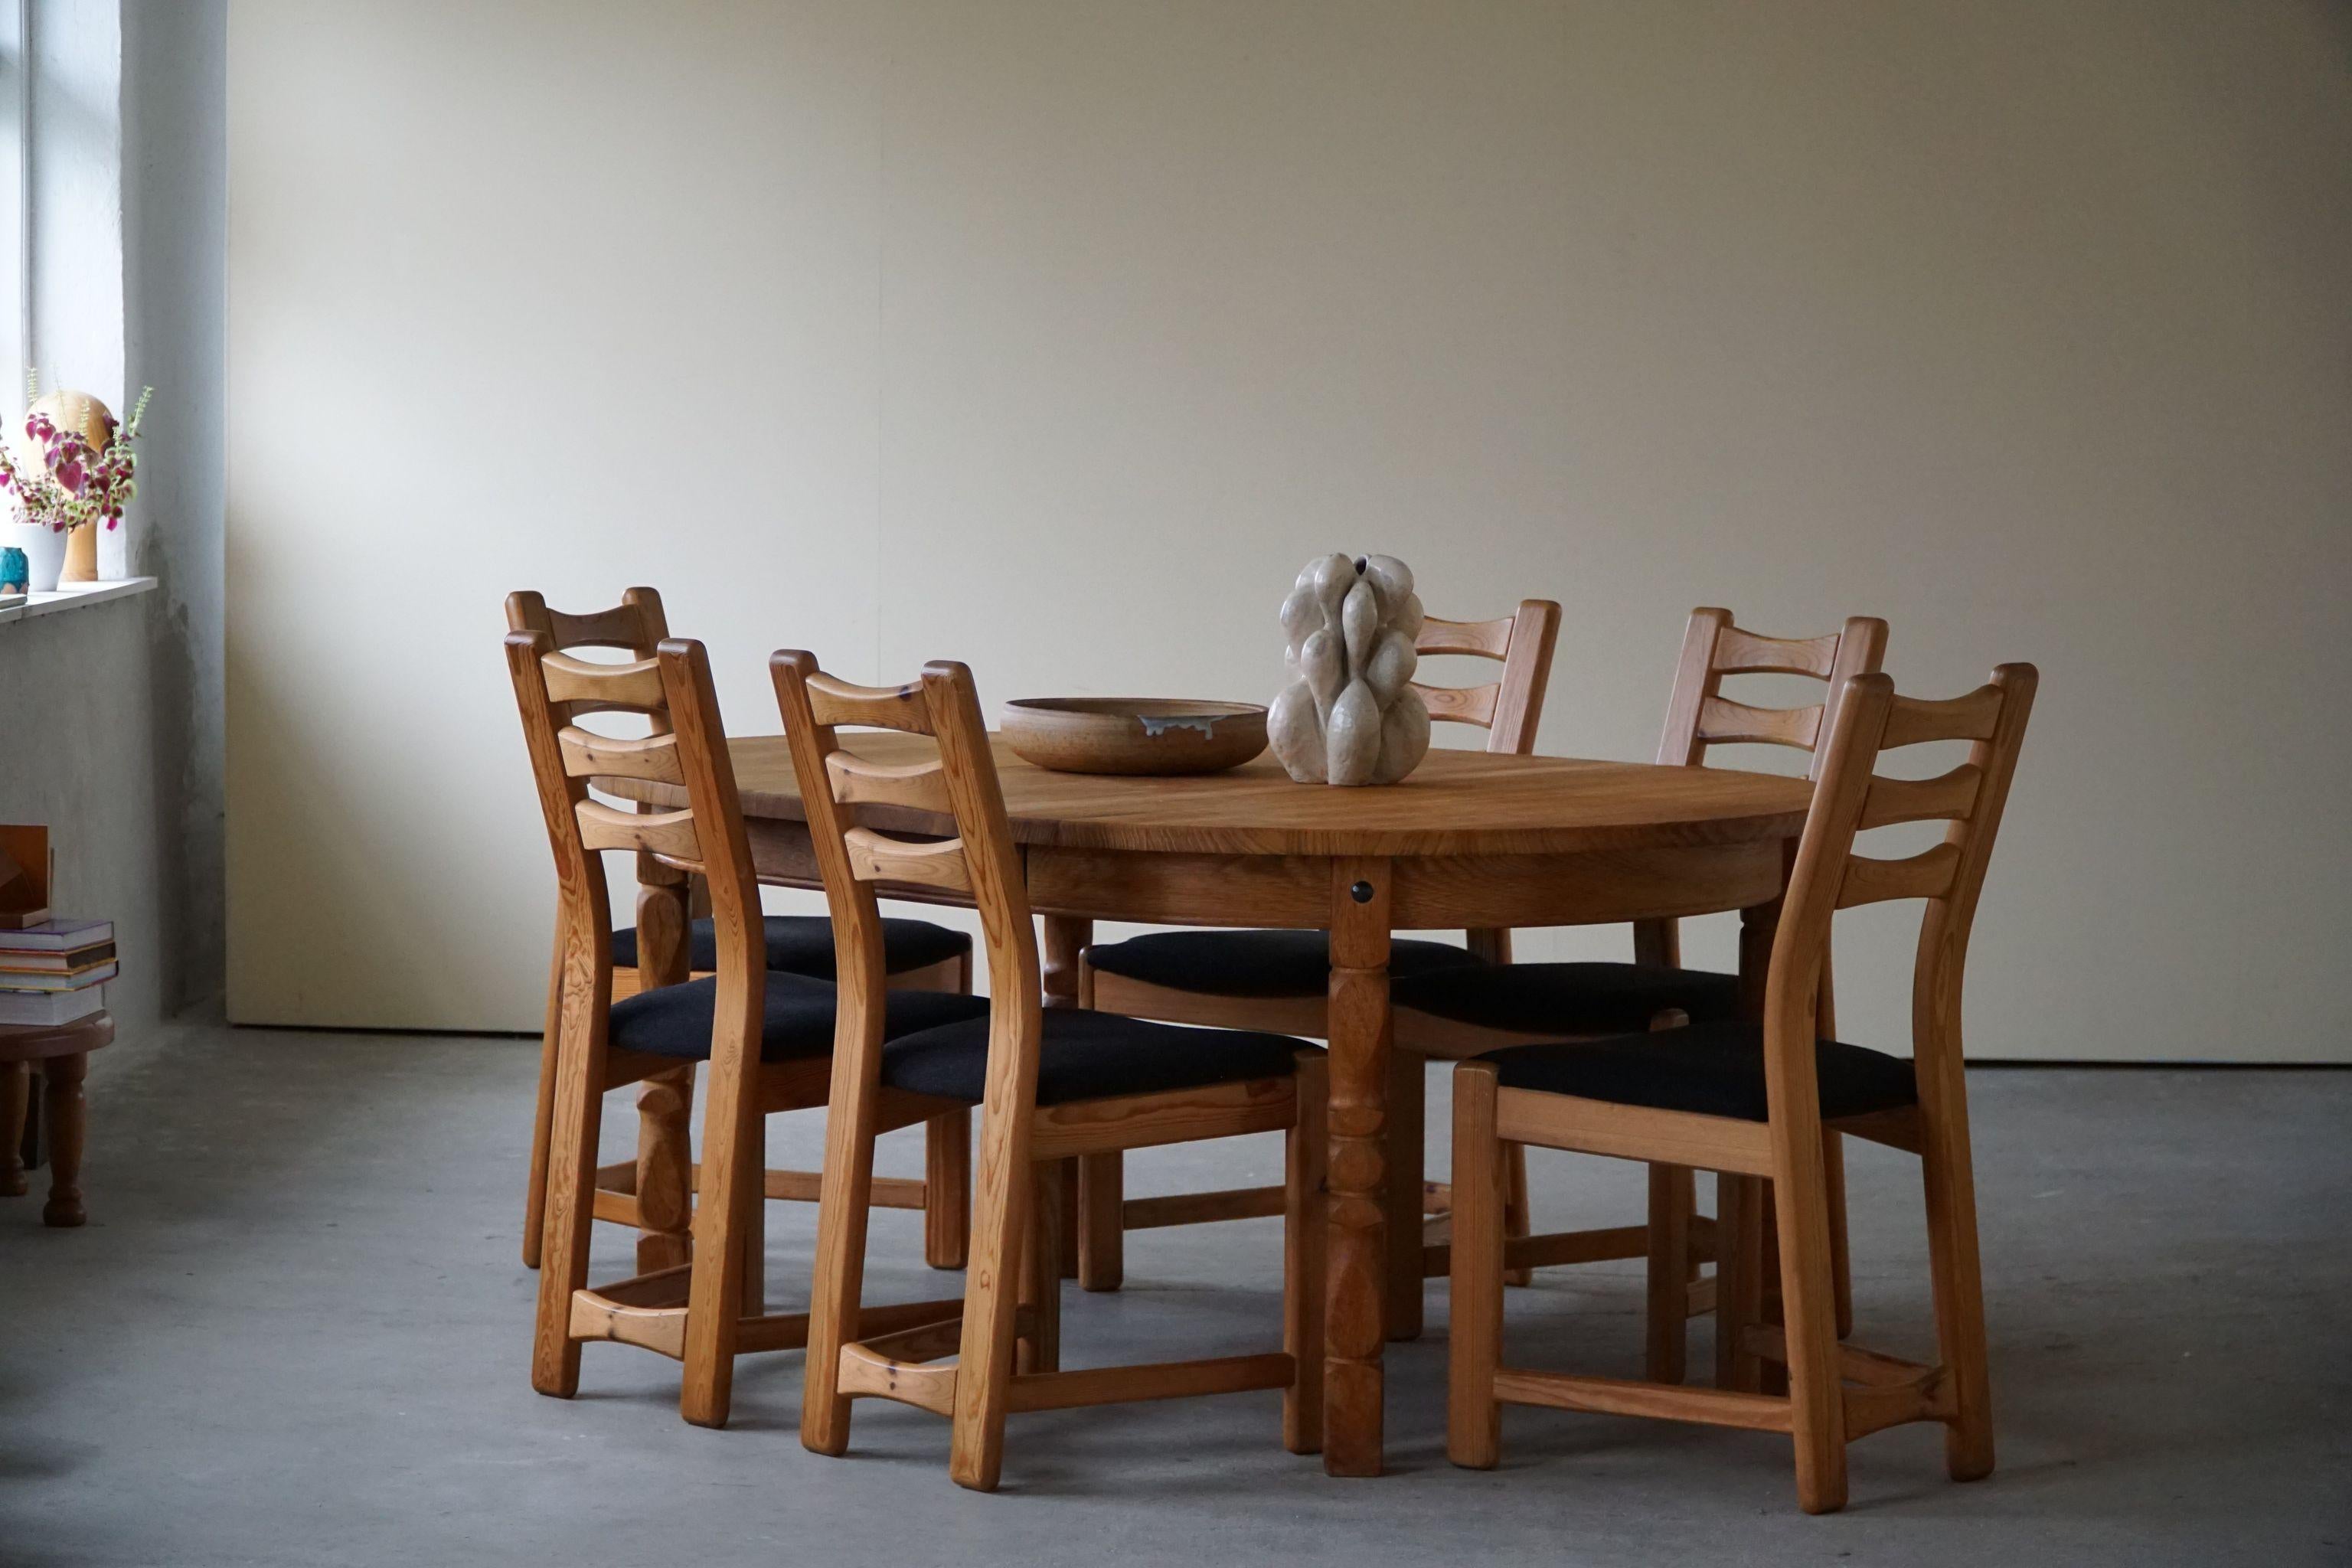 Set of 6 sculptural dining chairs in solid pine, reupholstered in black wool from Nevotex. Made by a Danish Cabinetmaker in 1970s. These brutalist chairs have a really strong impression that pair well with many types of interior styles. A Modern,